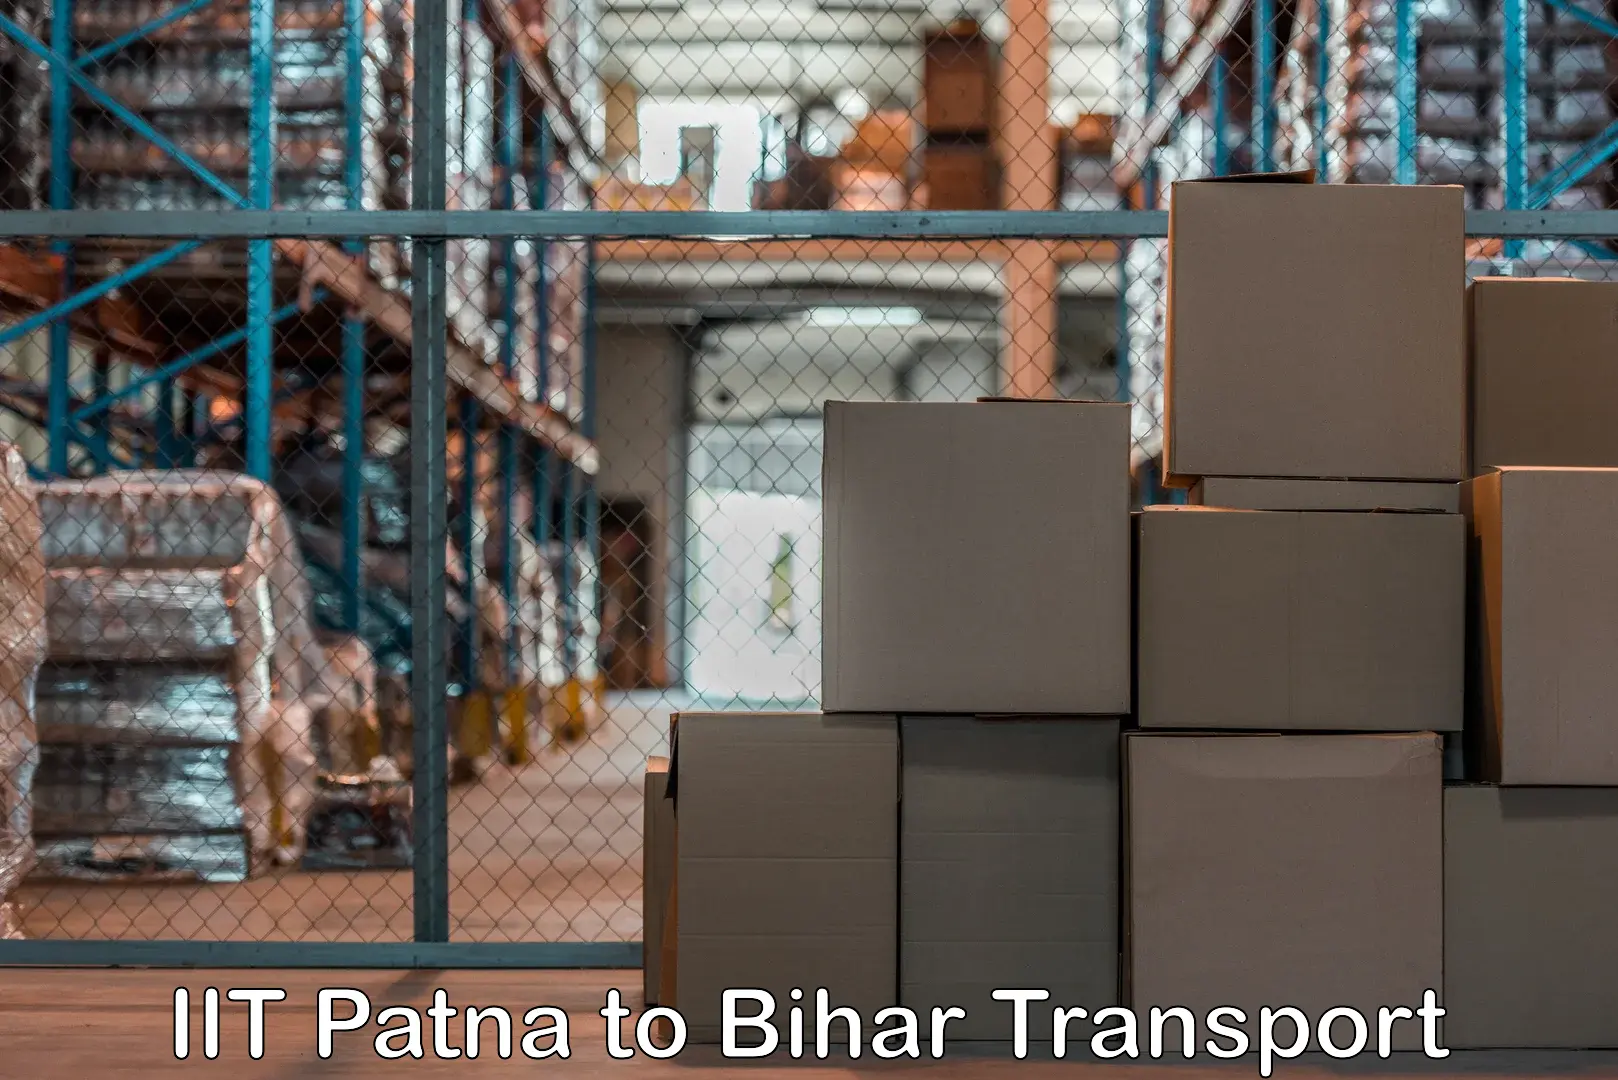 Express transport services in IIT Patna to Korha